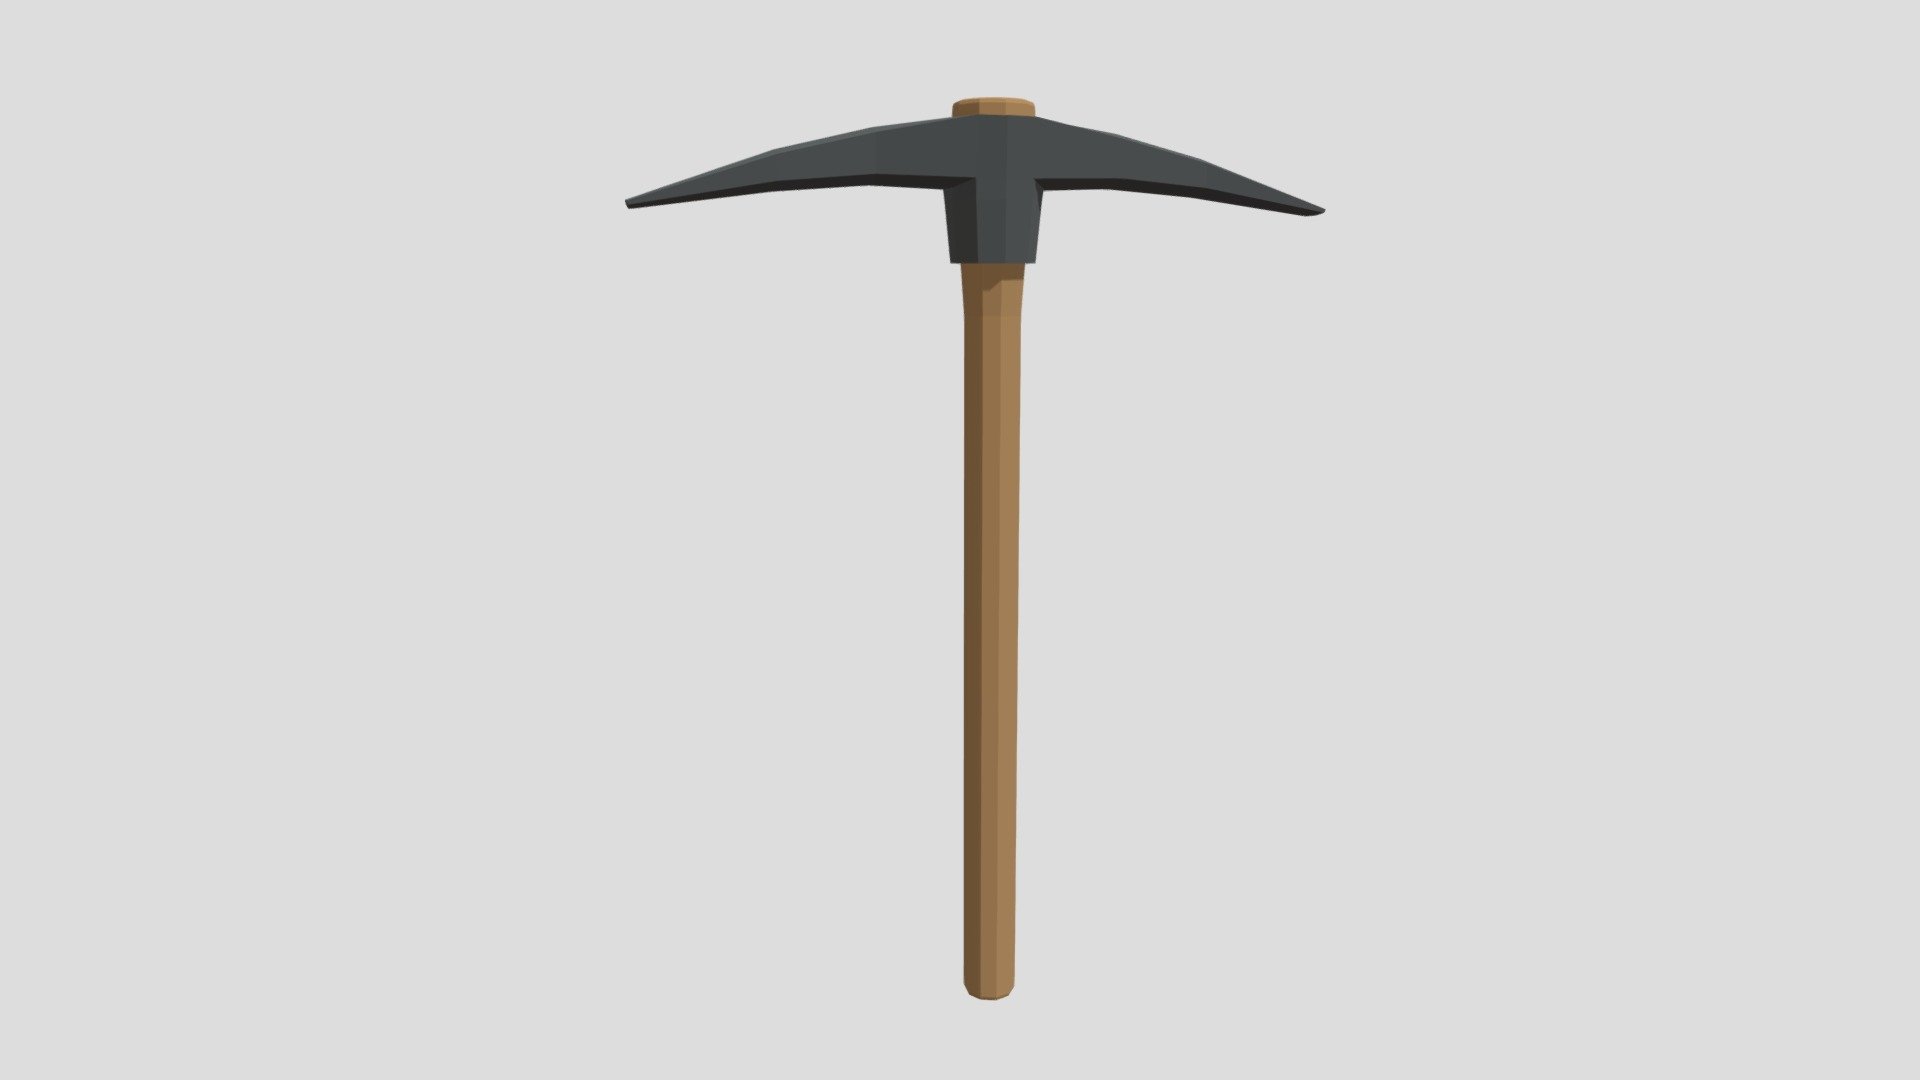 This is a low poly 3D model of a pickaxe. The low poly pickaxe was modeled and prepared for low-poly style renderings, background, general CG visualization presented as 1 mesh with quads/tris.

Verts : 202 Faces : 202.

The 3D model have simple materials with diffuse colors.

No ring, maps and no UVW mapping is available.

The original file was created in blender. You will receive a OBJ, FBX, blend, DAE, Stl, gLTF.

All preview images were rendered with Blender Cycles. Product is ready to render out-of-the-box. Please note that the lights, cameras, and background is only included in the .blend file. The model is clean and alone in the other provided files, centred at origin and has real-world scale 3d model